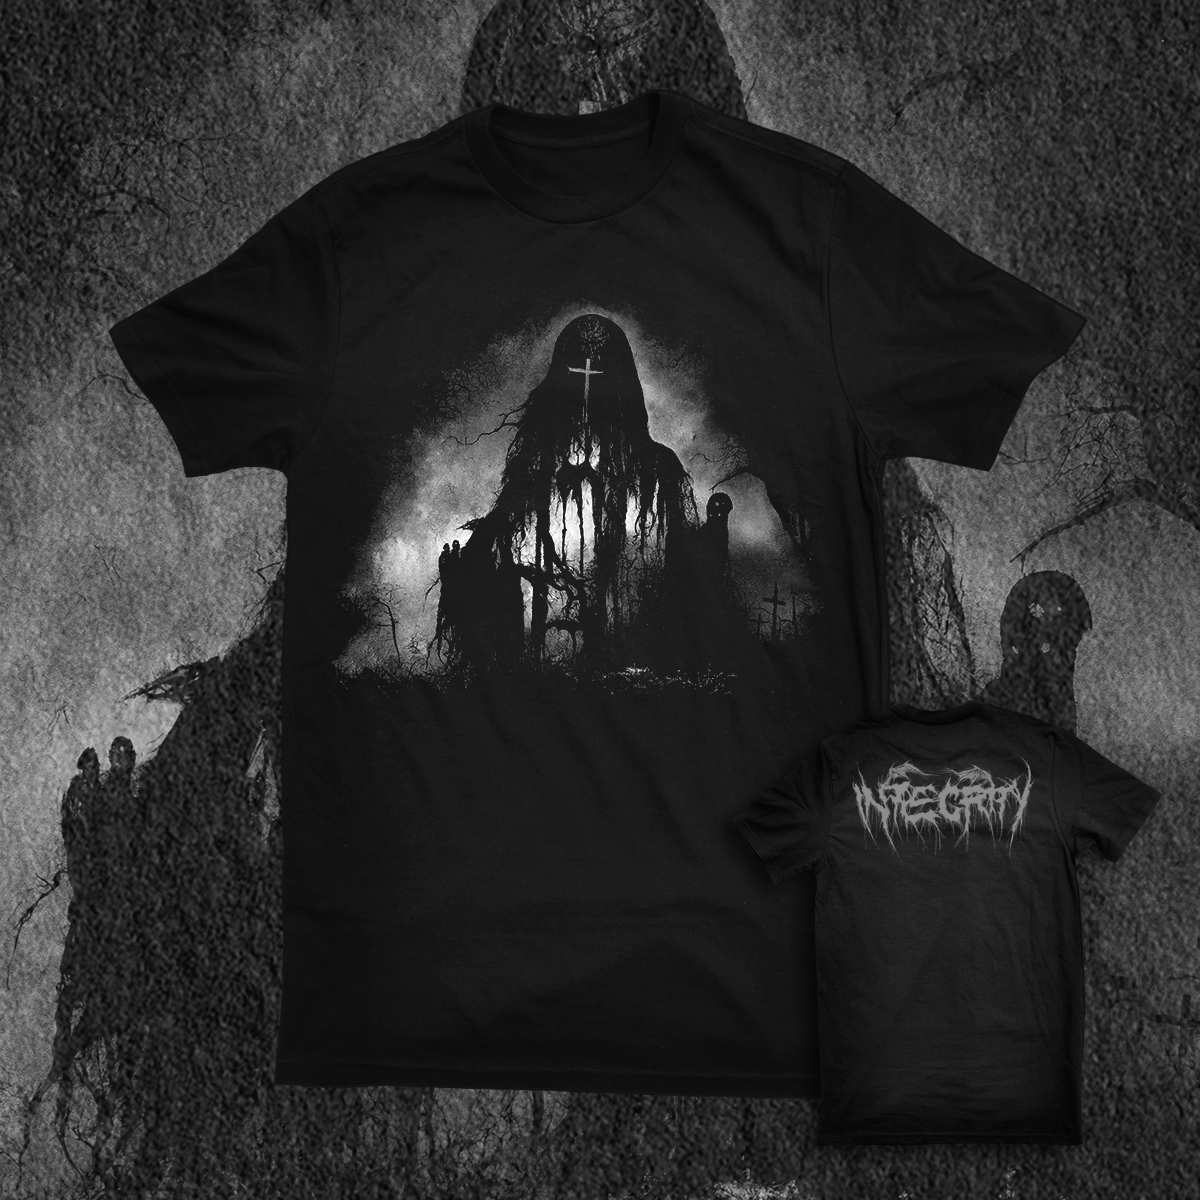 INTEGRITY "GHOUL" SHIRT (PRE ORDER)